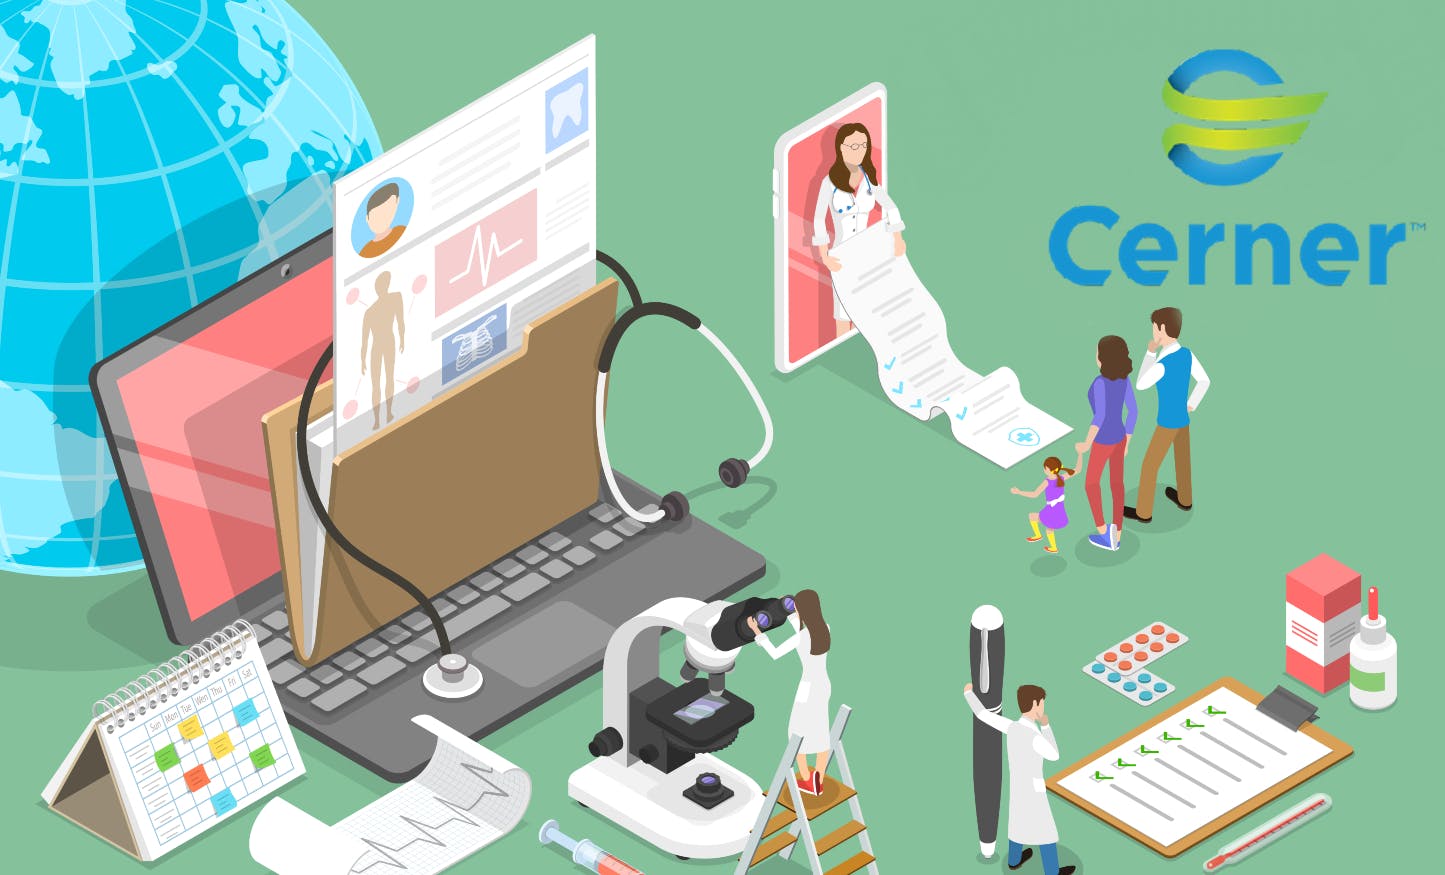 Cerner: Full Review, Products, and Services